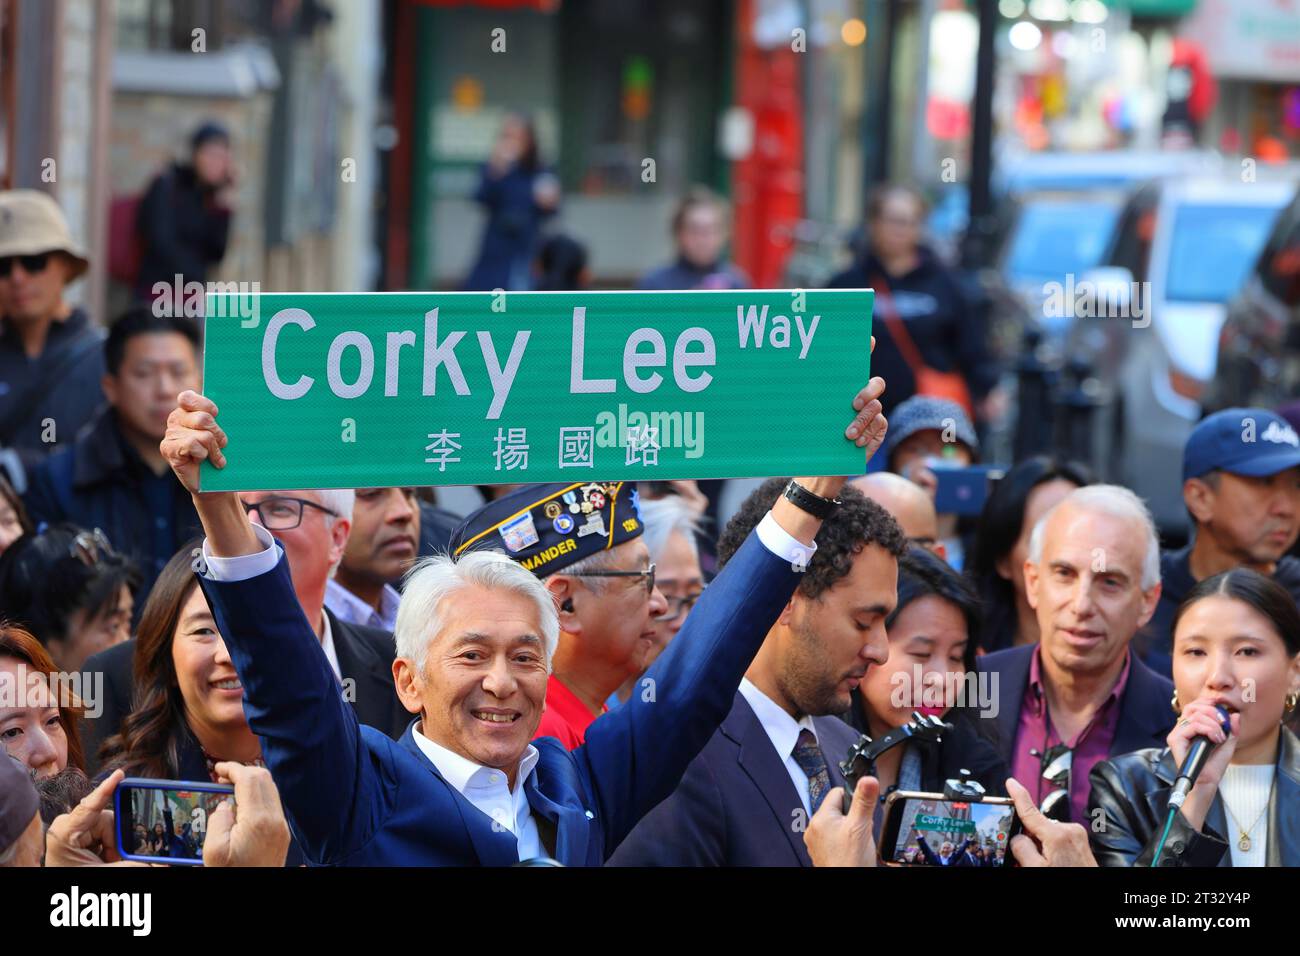 22 October 2023, New York. People celebrate Corky Lee Way 李揚國路 co-naming of Mosco St in Manhattan Chinatown. John Lee, a sibling of Corky Lee, holds a Corky Lee Way street sign. Corky Lee was a photojournalist, photographer and civil rights activist who documented Asian American history; he is sometimes referred to as the 'unofficial Asian American photographer laureate'. Mr. Lee died in 2021 from complications due to Covid-19. Stock Photo